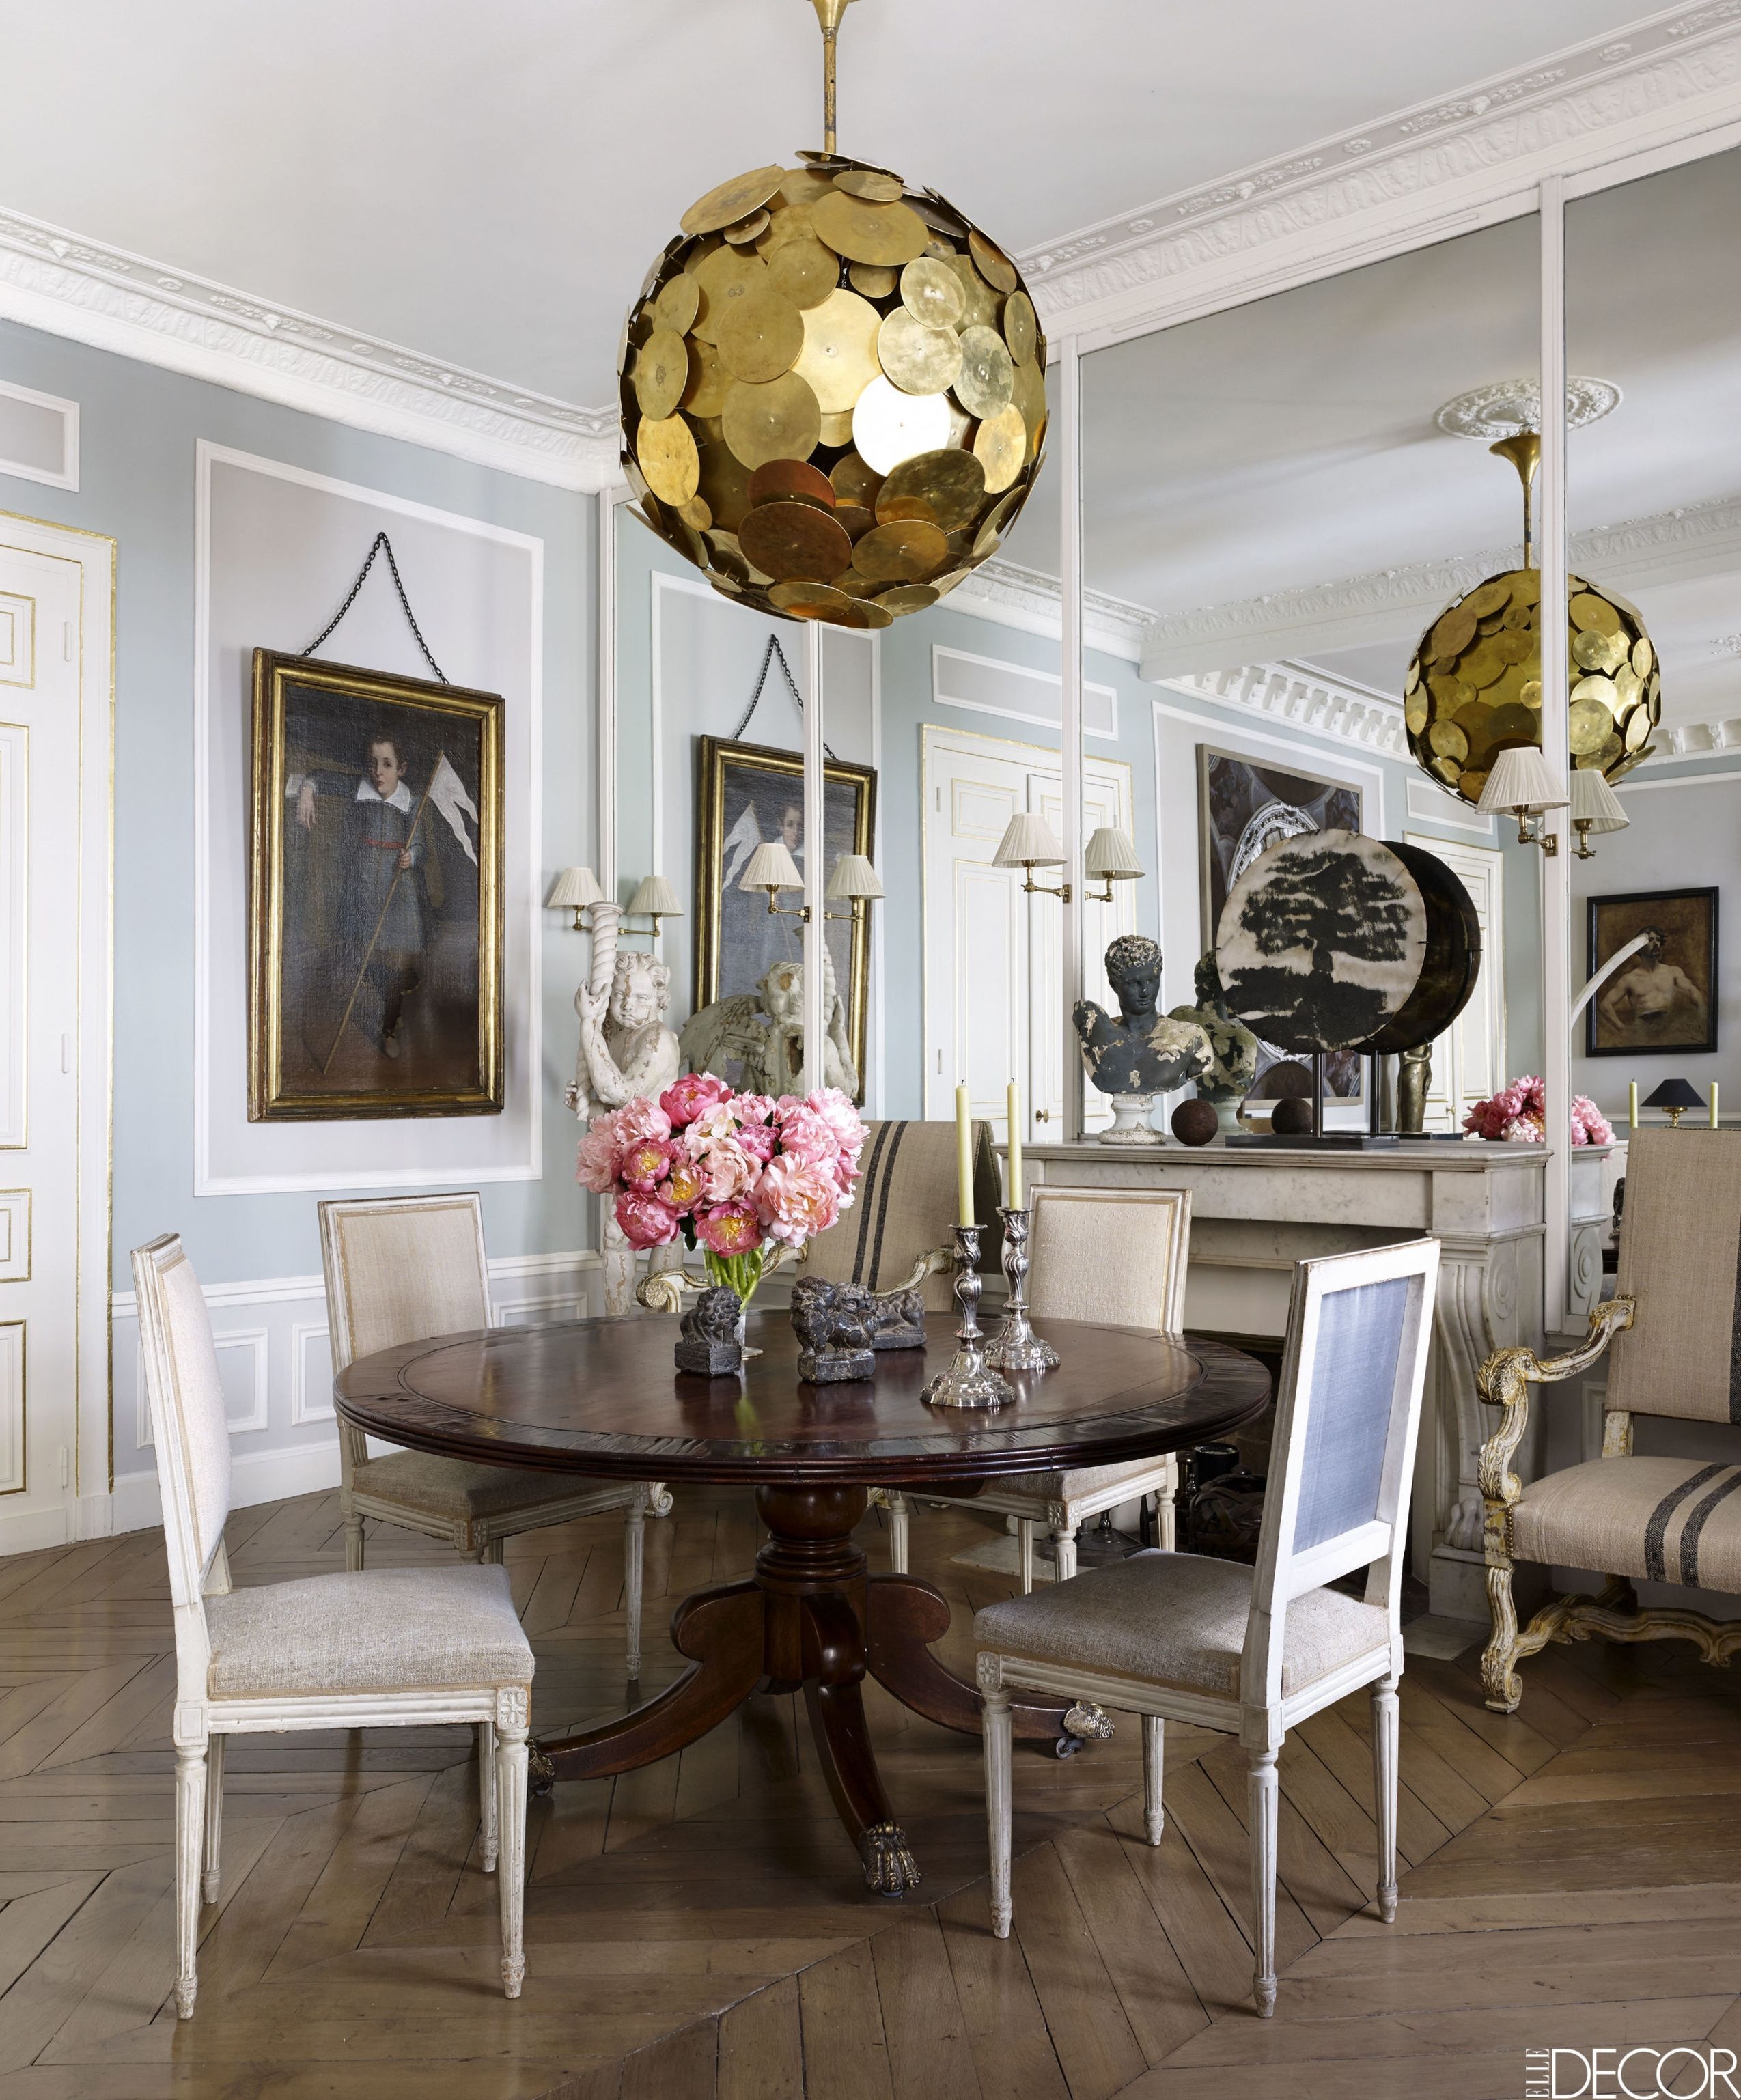 20 Of The Most Stylish Rooms In Paris, Paris Decorations For Living Room